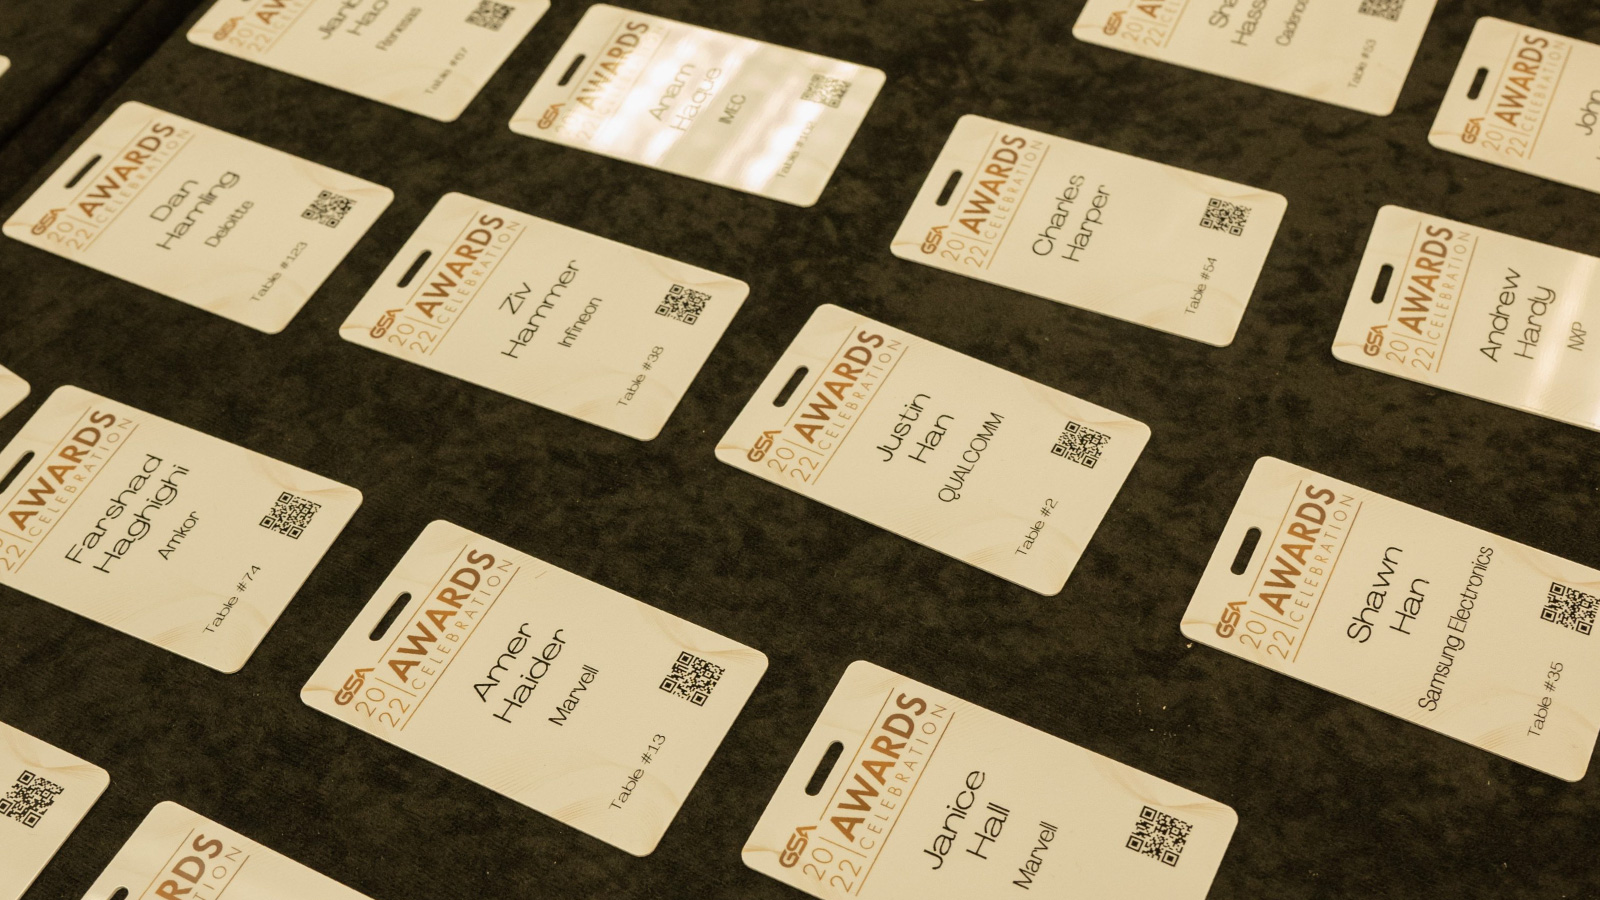 an image of Awards Dinner name badges laid out on table